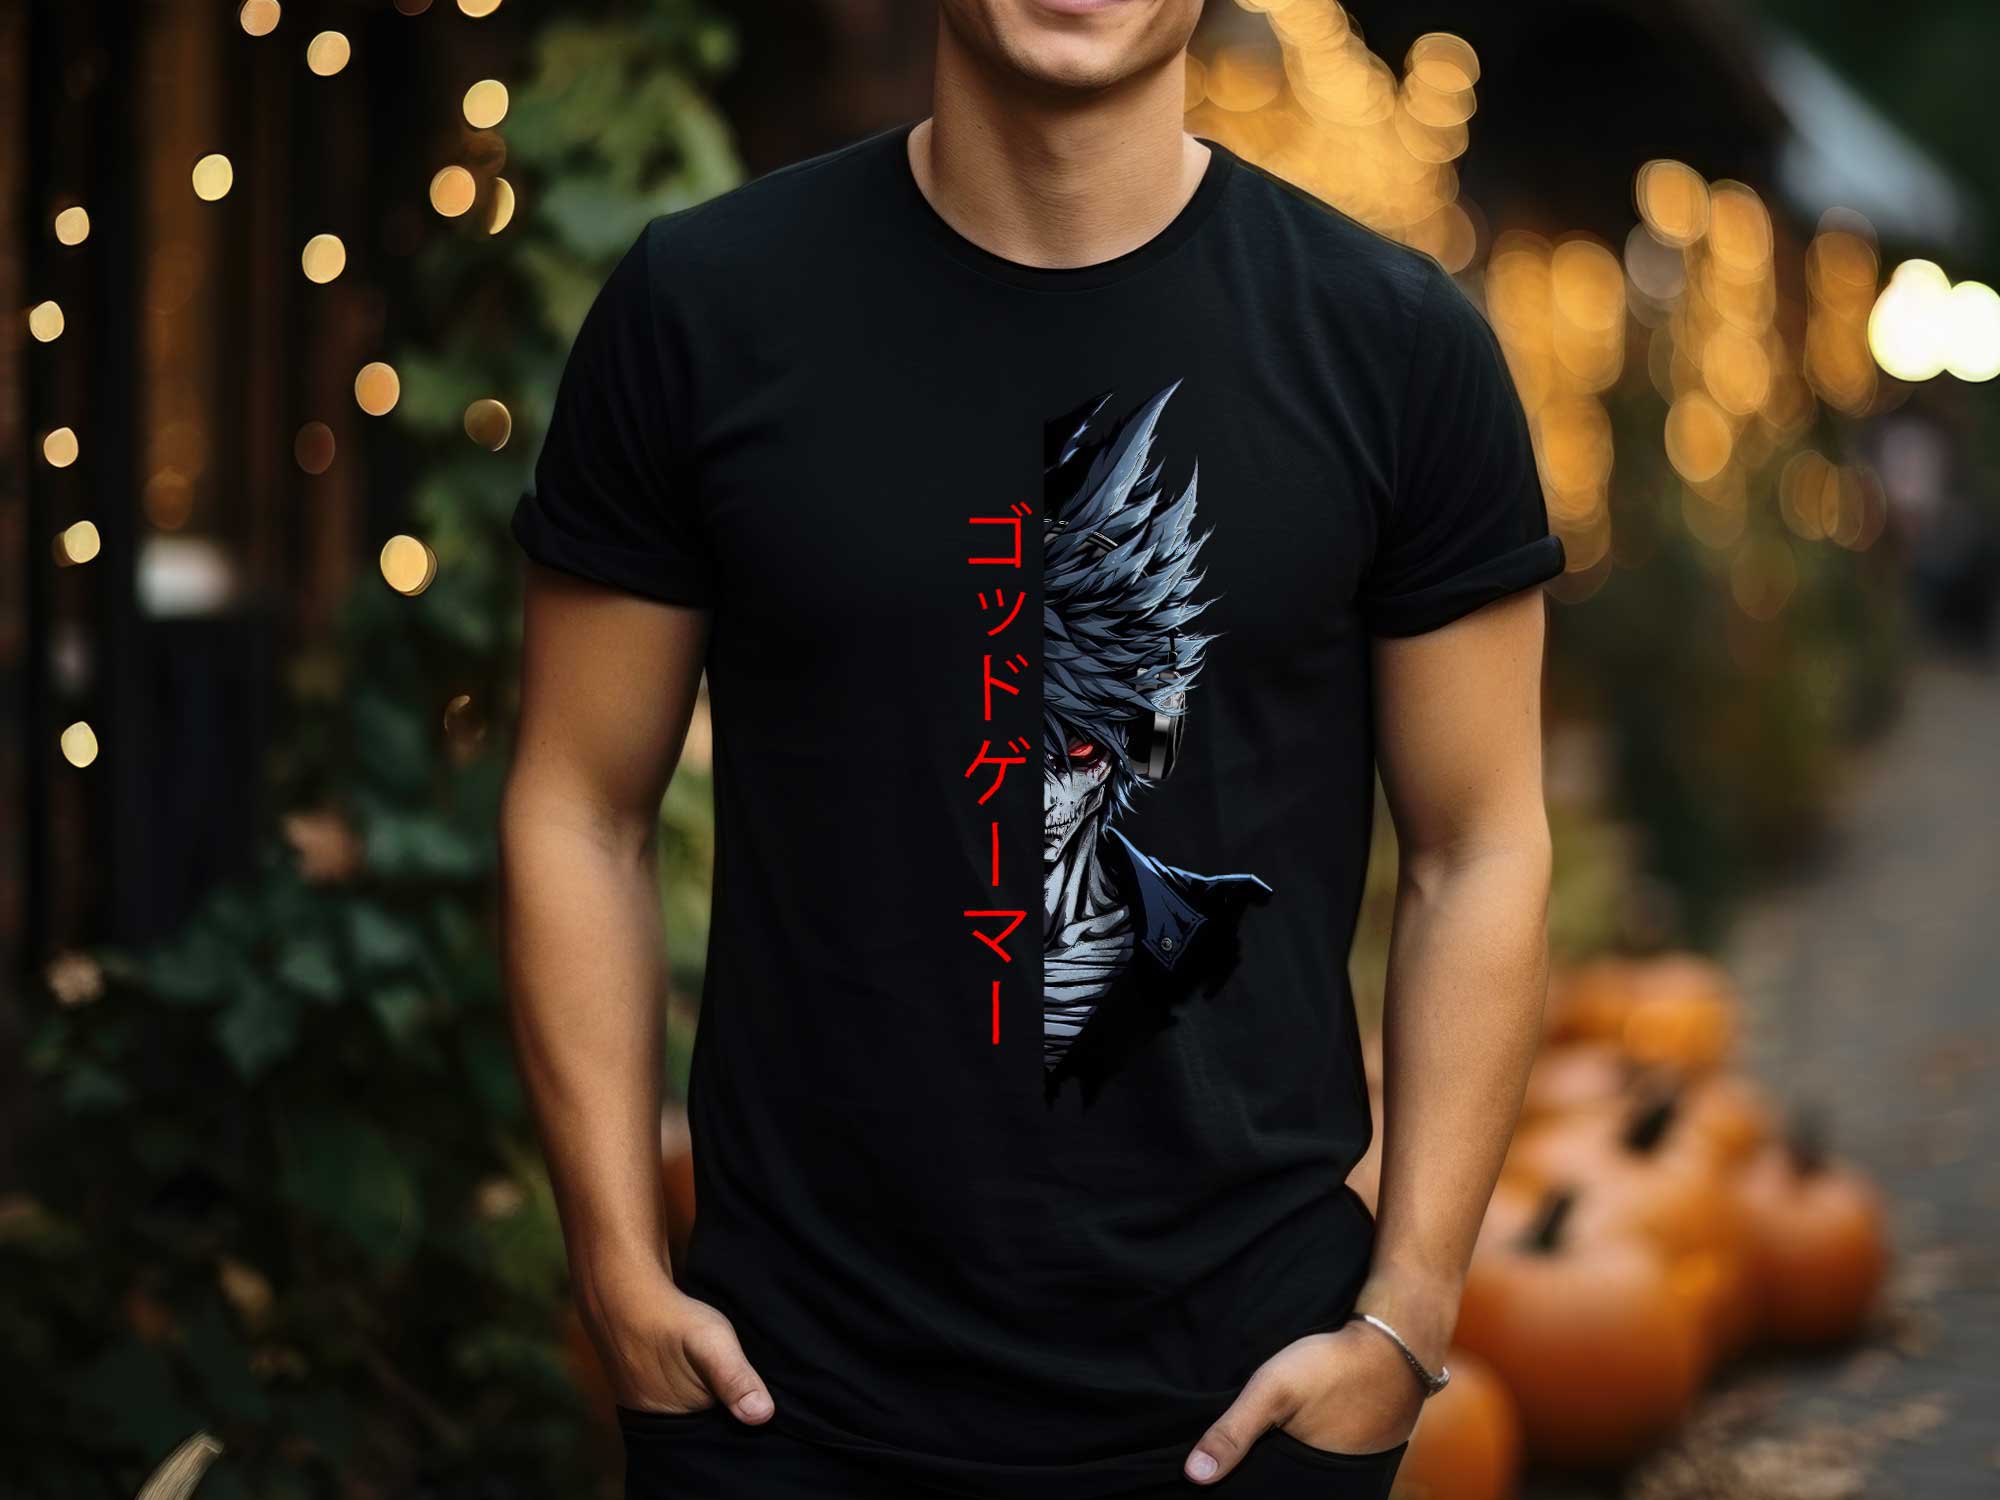 Male model wearing the God Gamer Shirt - image for Etsy review